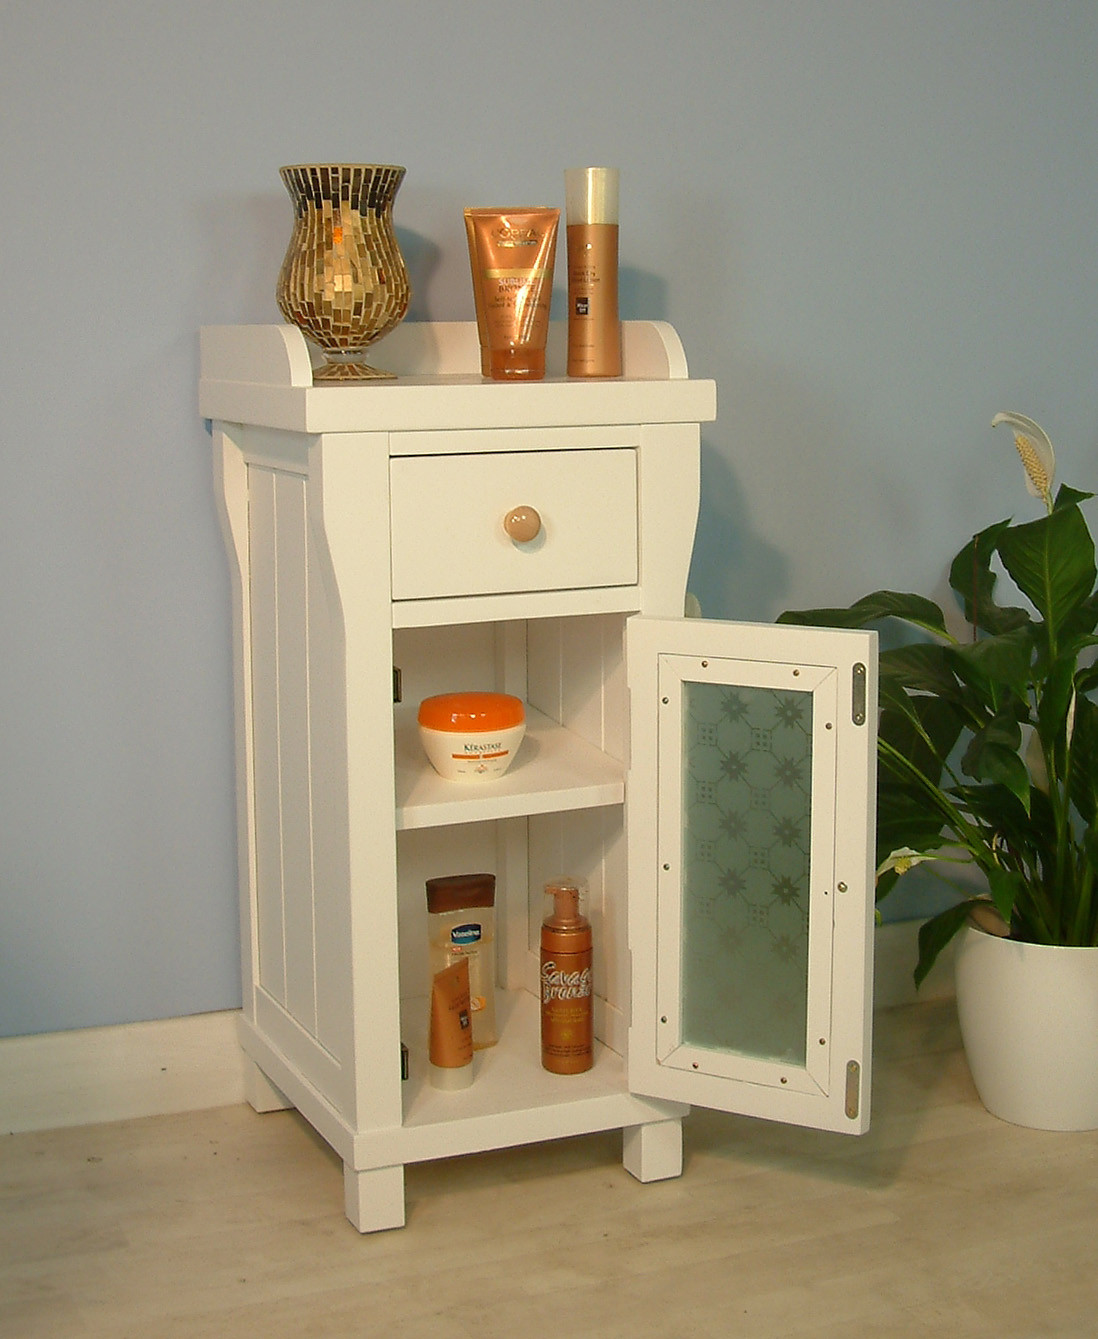 Small Bathroom Cabinet
 9 small bathroom storage ideas you cant afford to overlook